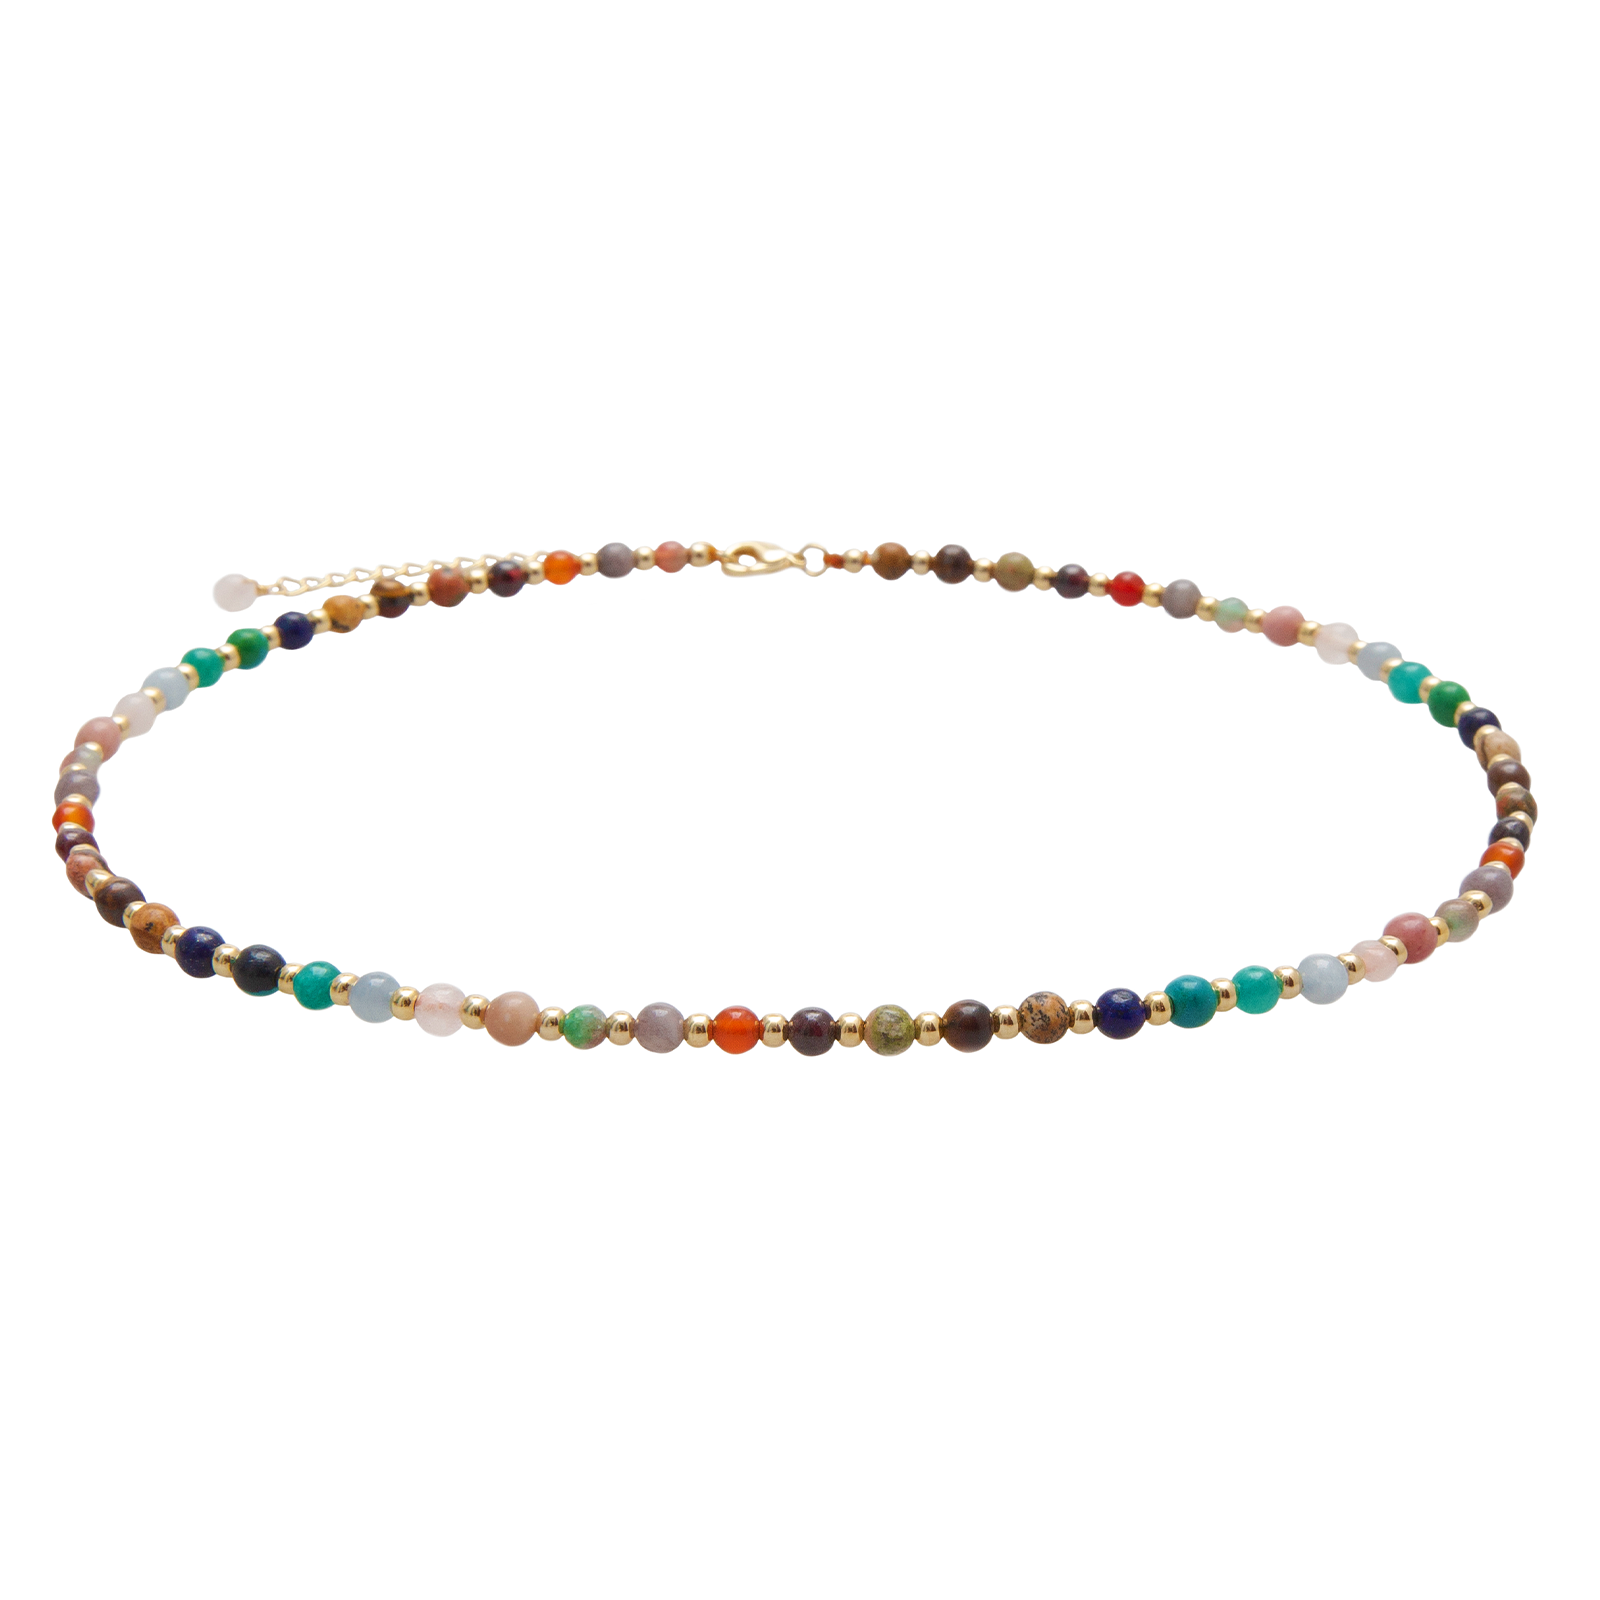 4mm multicolor stone and gold bead healing necklace with a gold chain